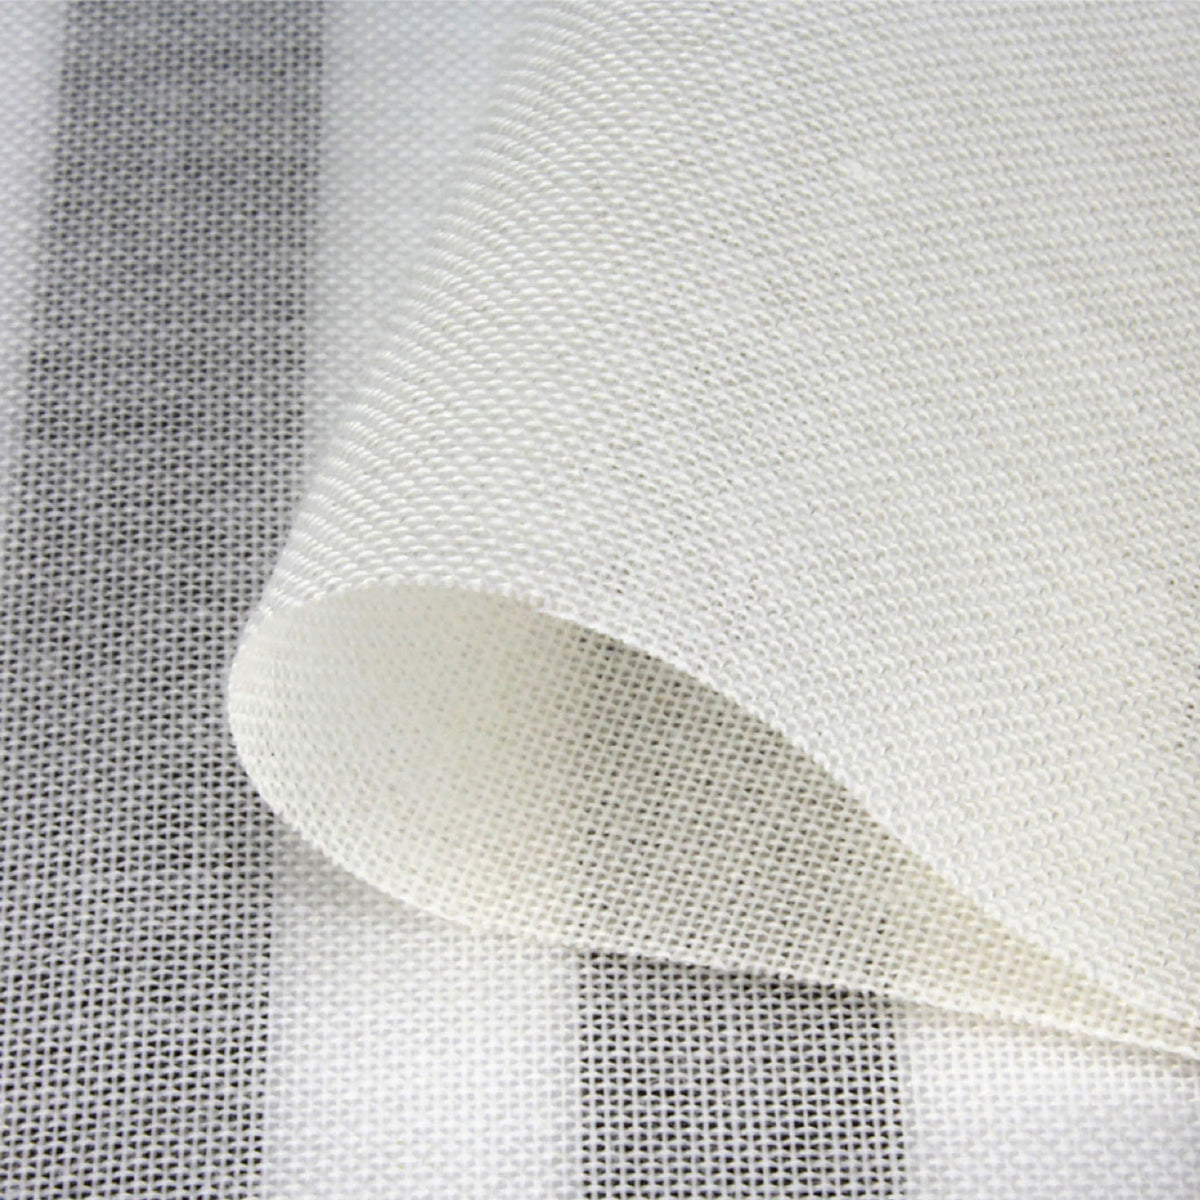 ULTIMA Shielding Fabric for High Frequency EMF (per metre)